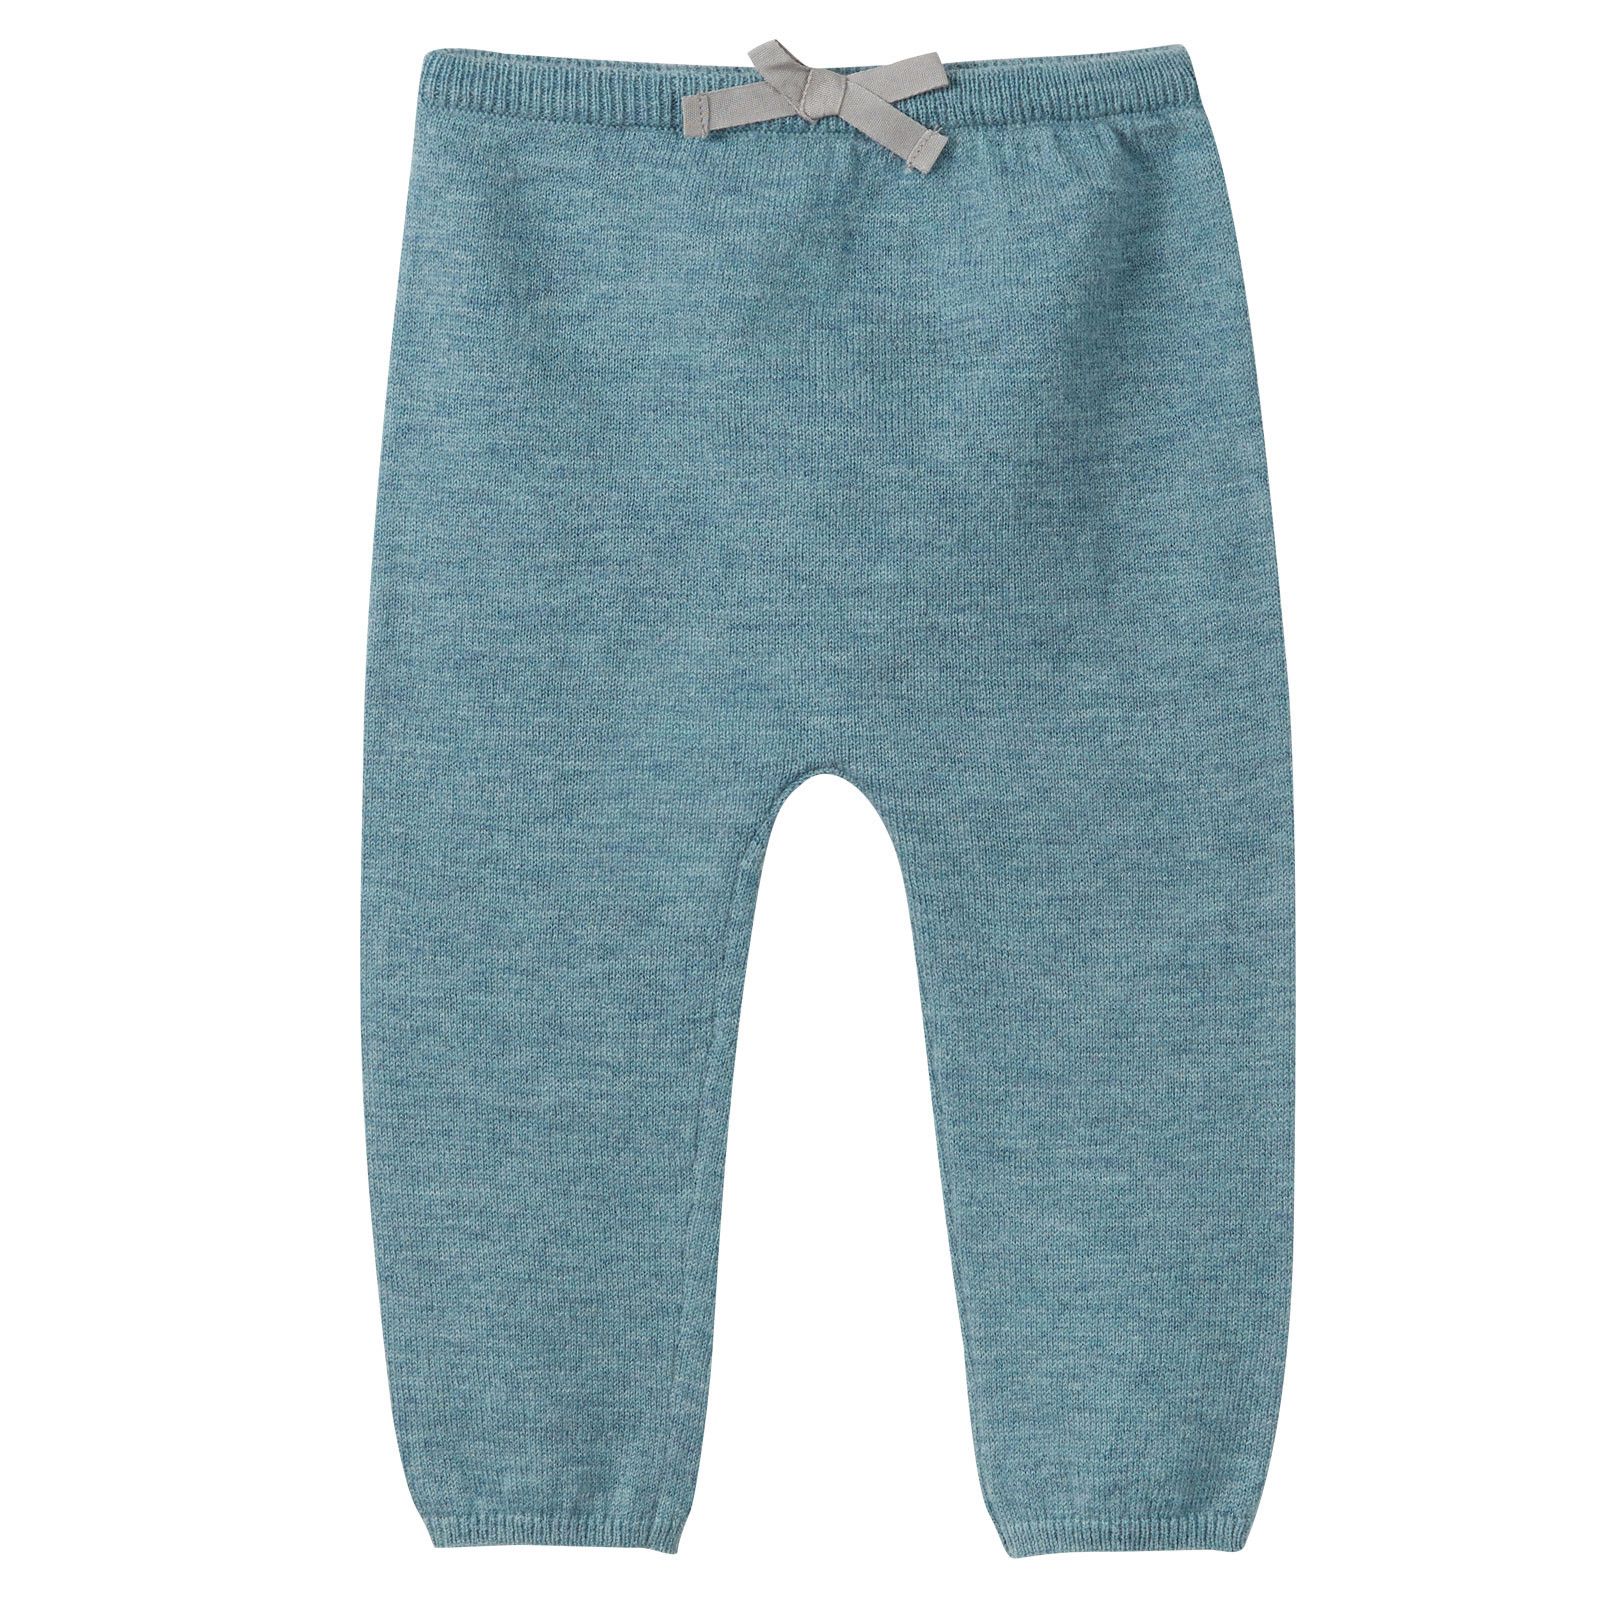 Baby Girls Misty Blue Knitted Legging With Bow Trims - CÉMAROSE | Children's Fashion Store - 1